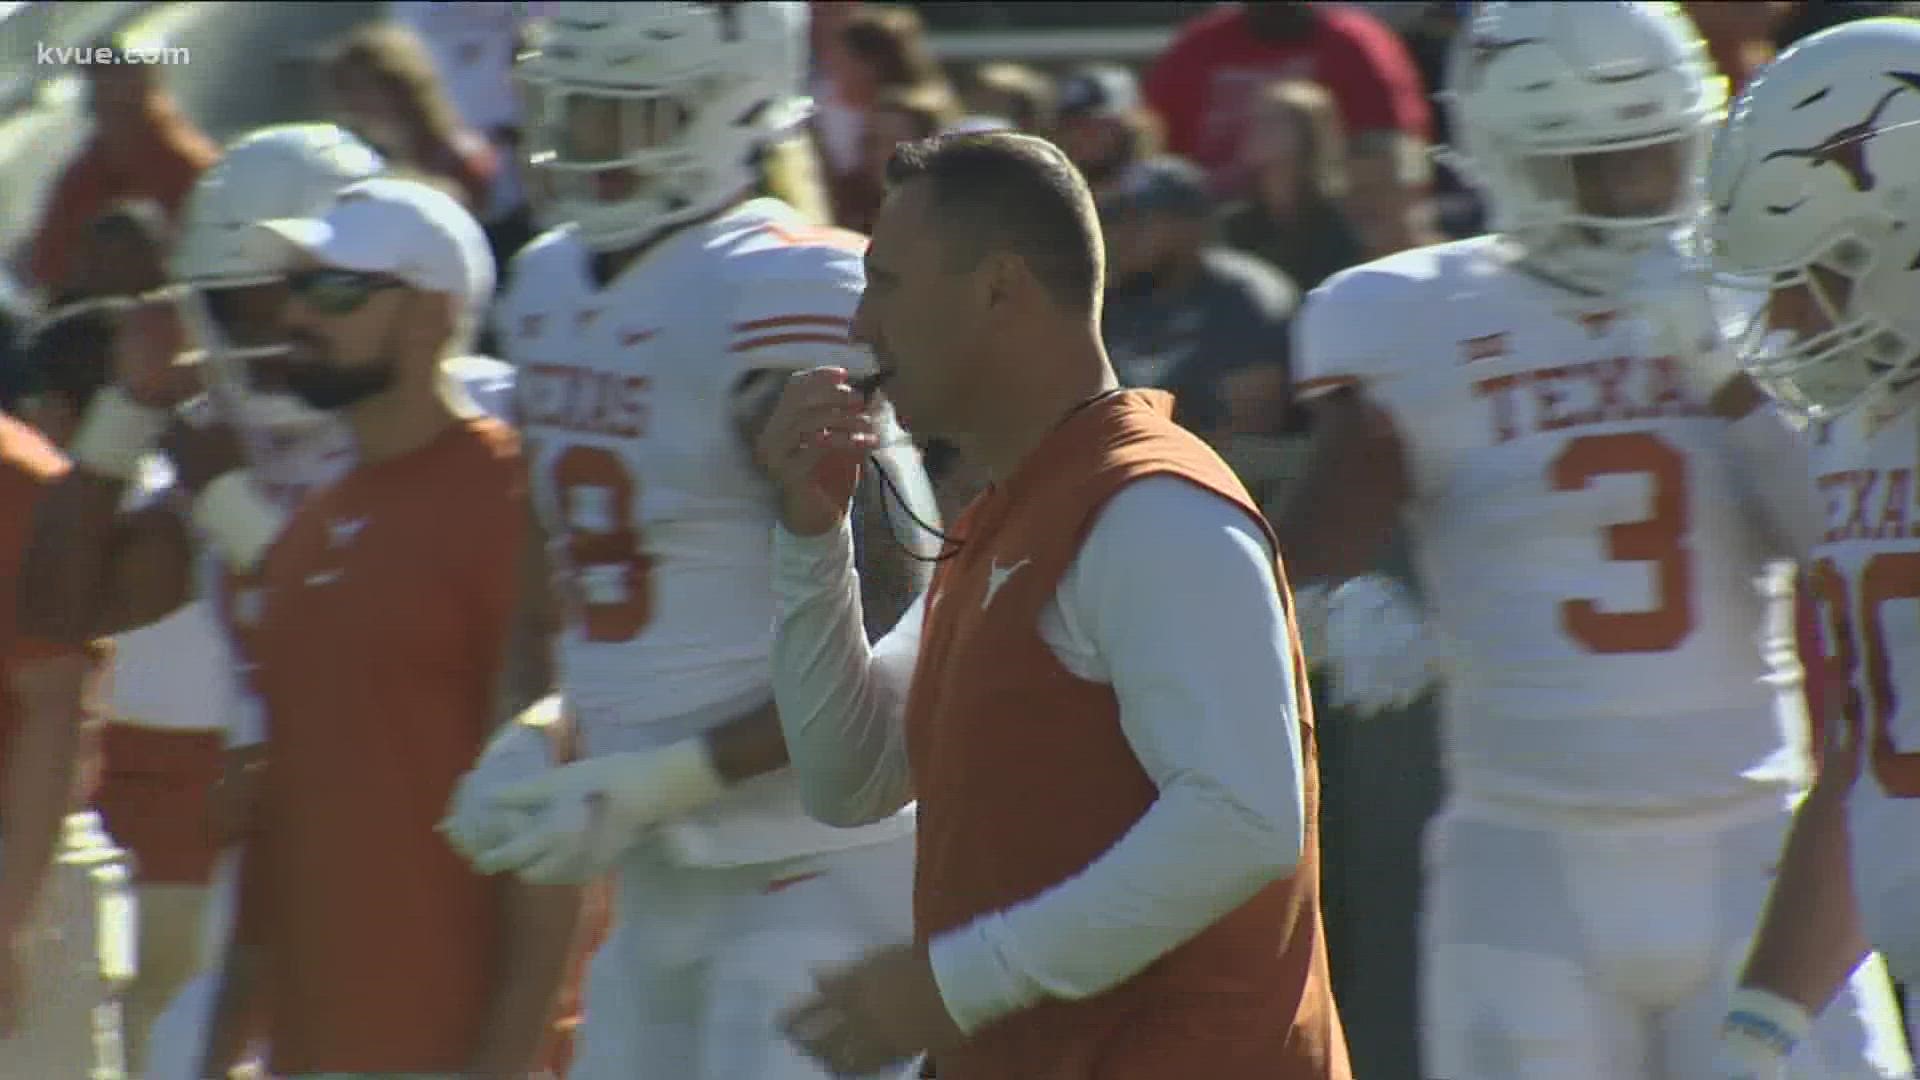 The response came following a leaked video featuring Coach Bo Davis laying into the team.